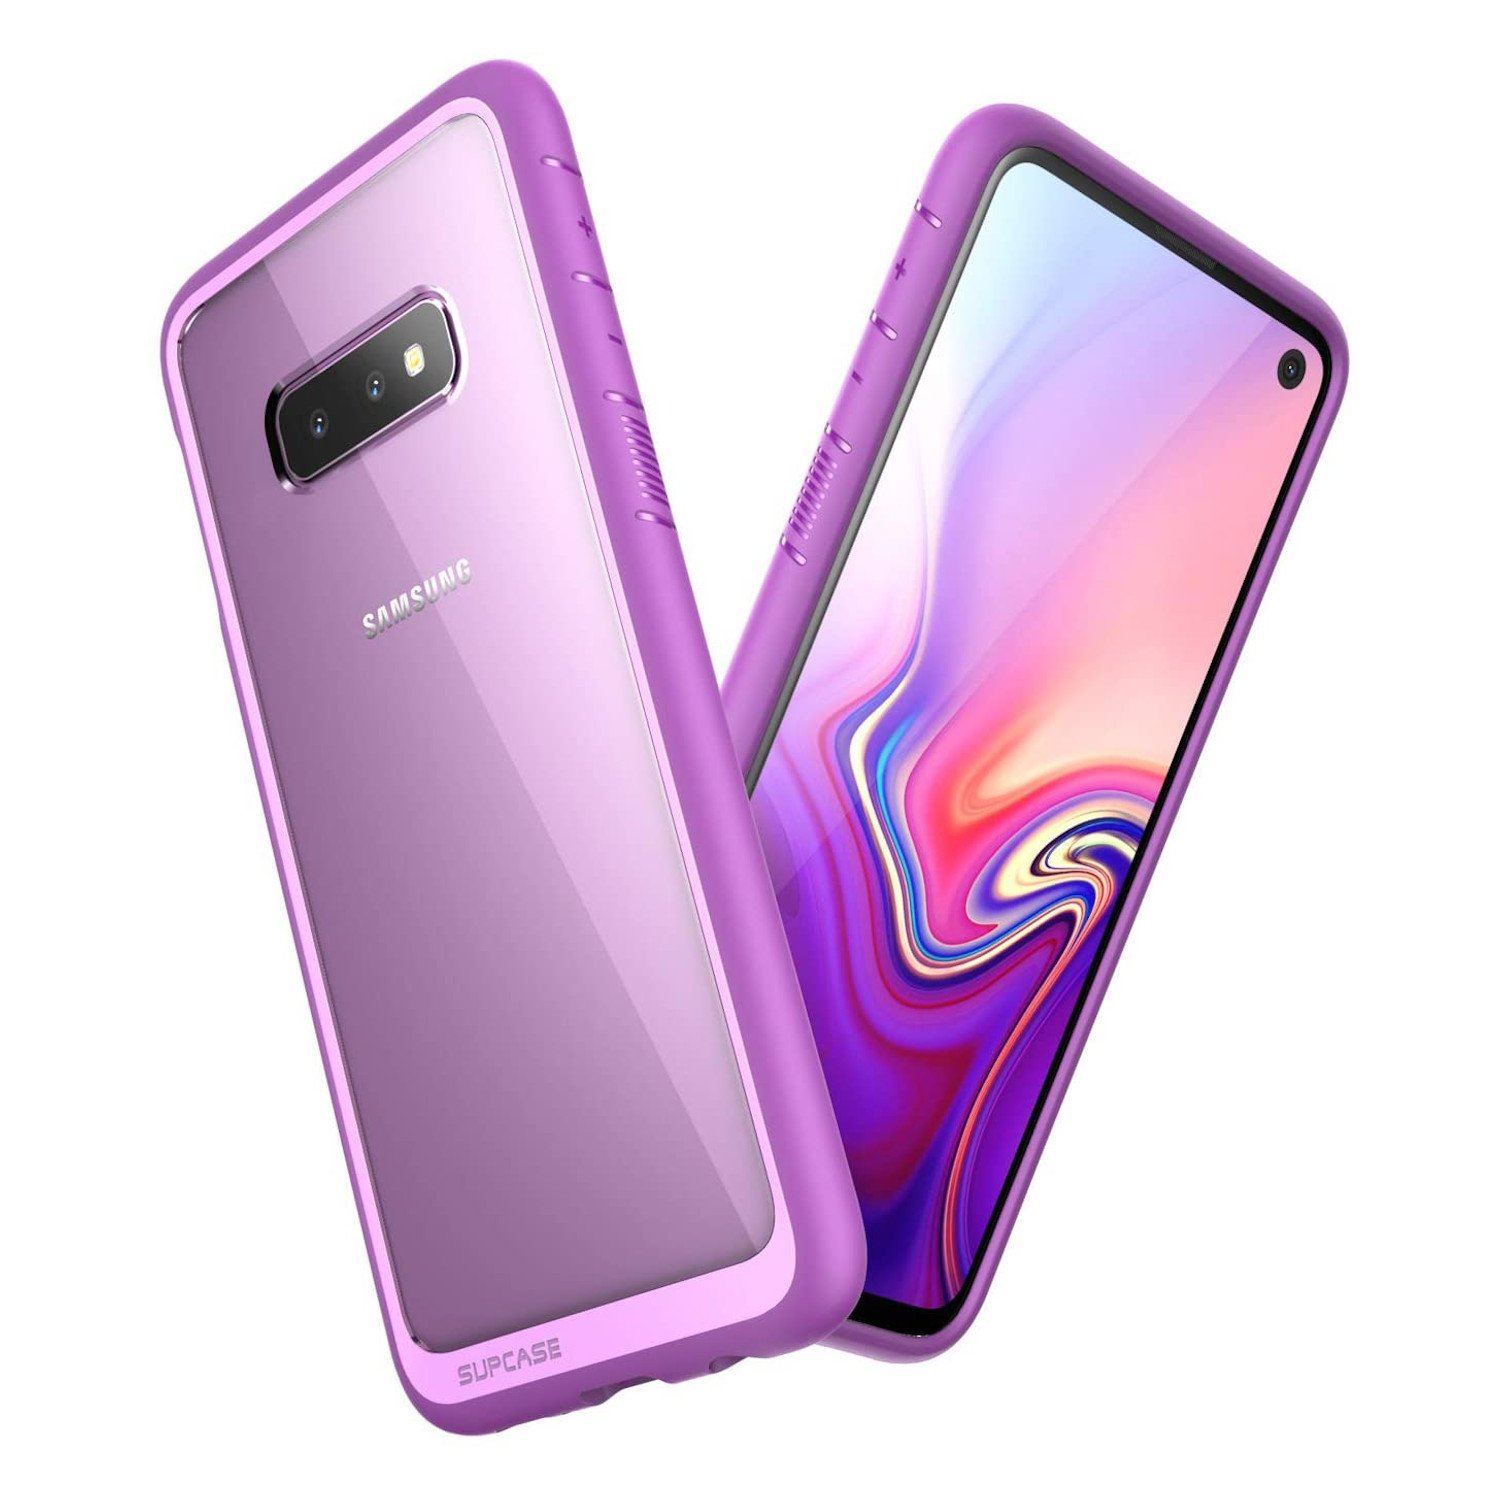 Supcase UB Style Series Hybrid Protective Clear Case for Samsung Galaxy S10e, Purple Samsung Case Supcase Purple 